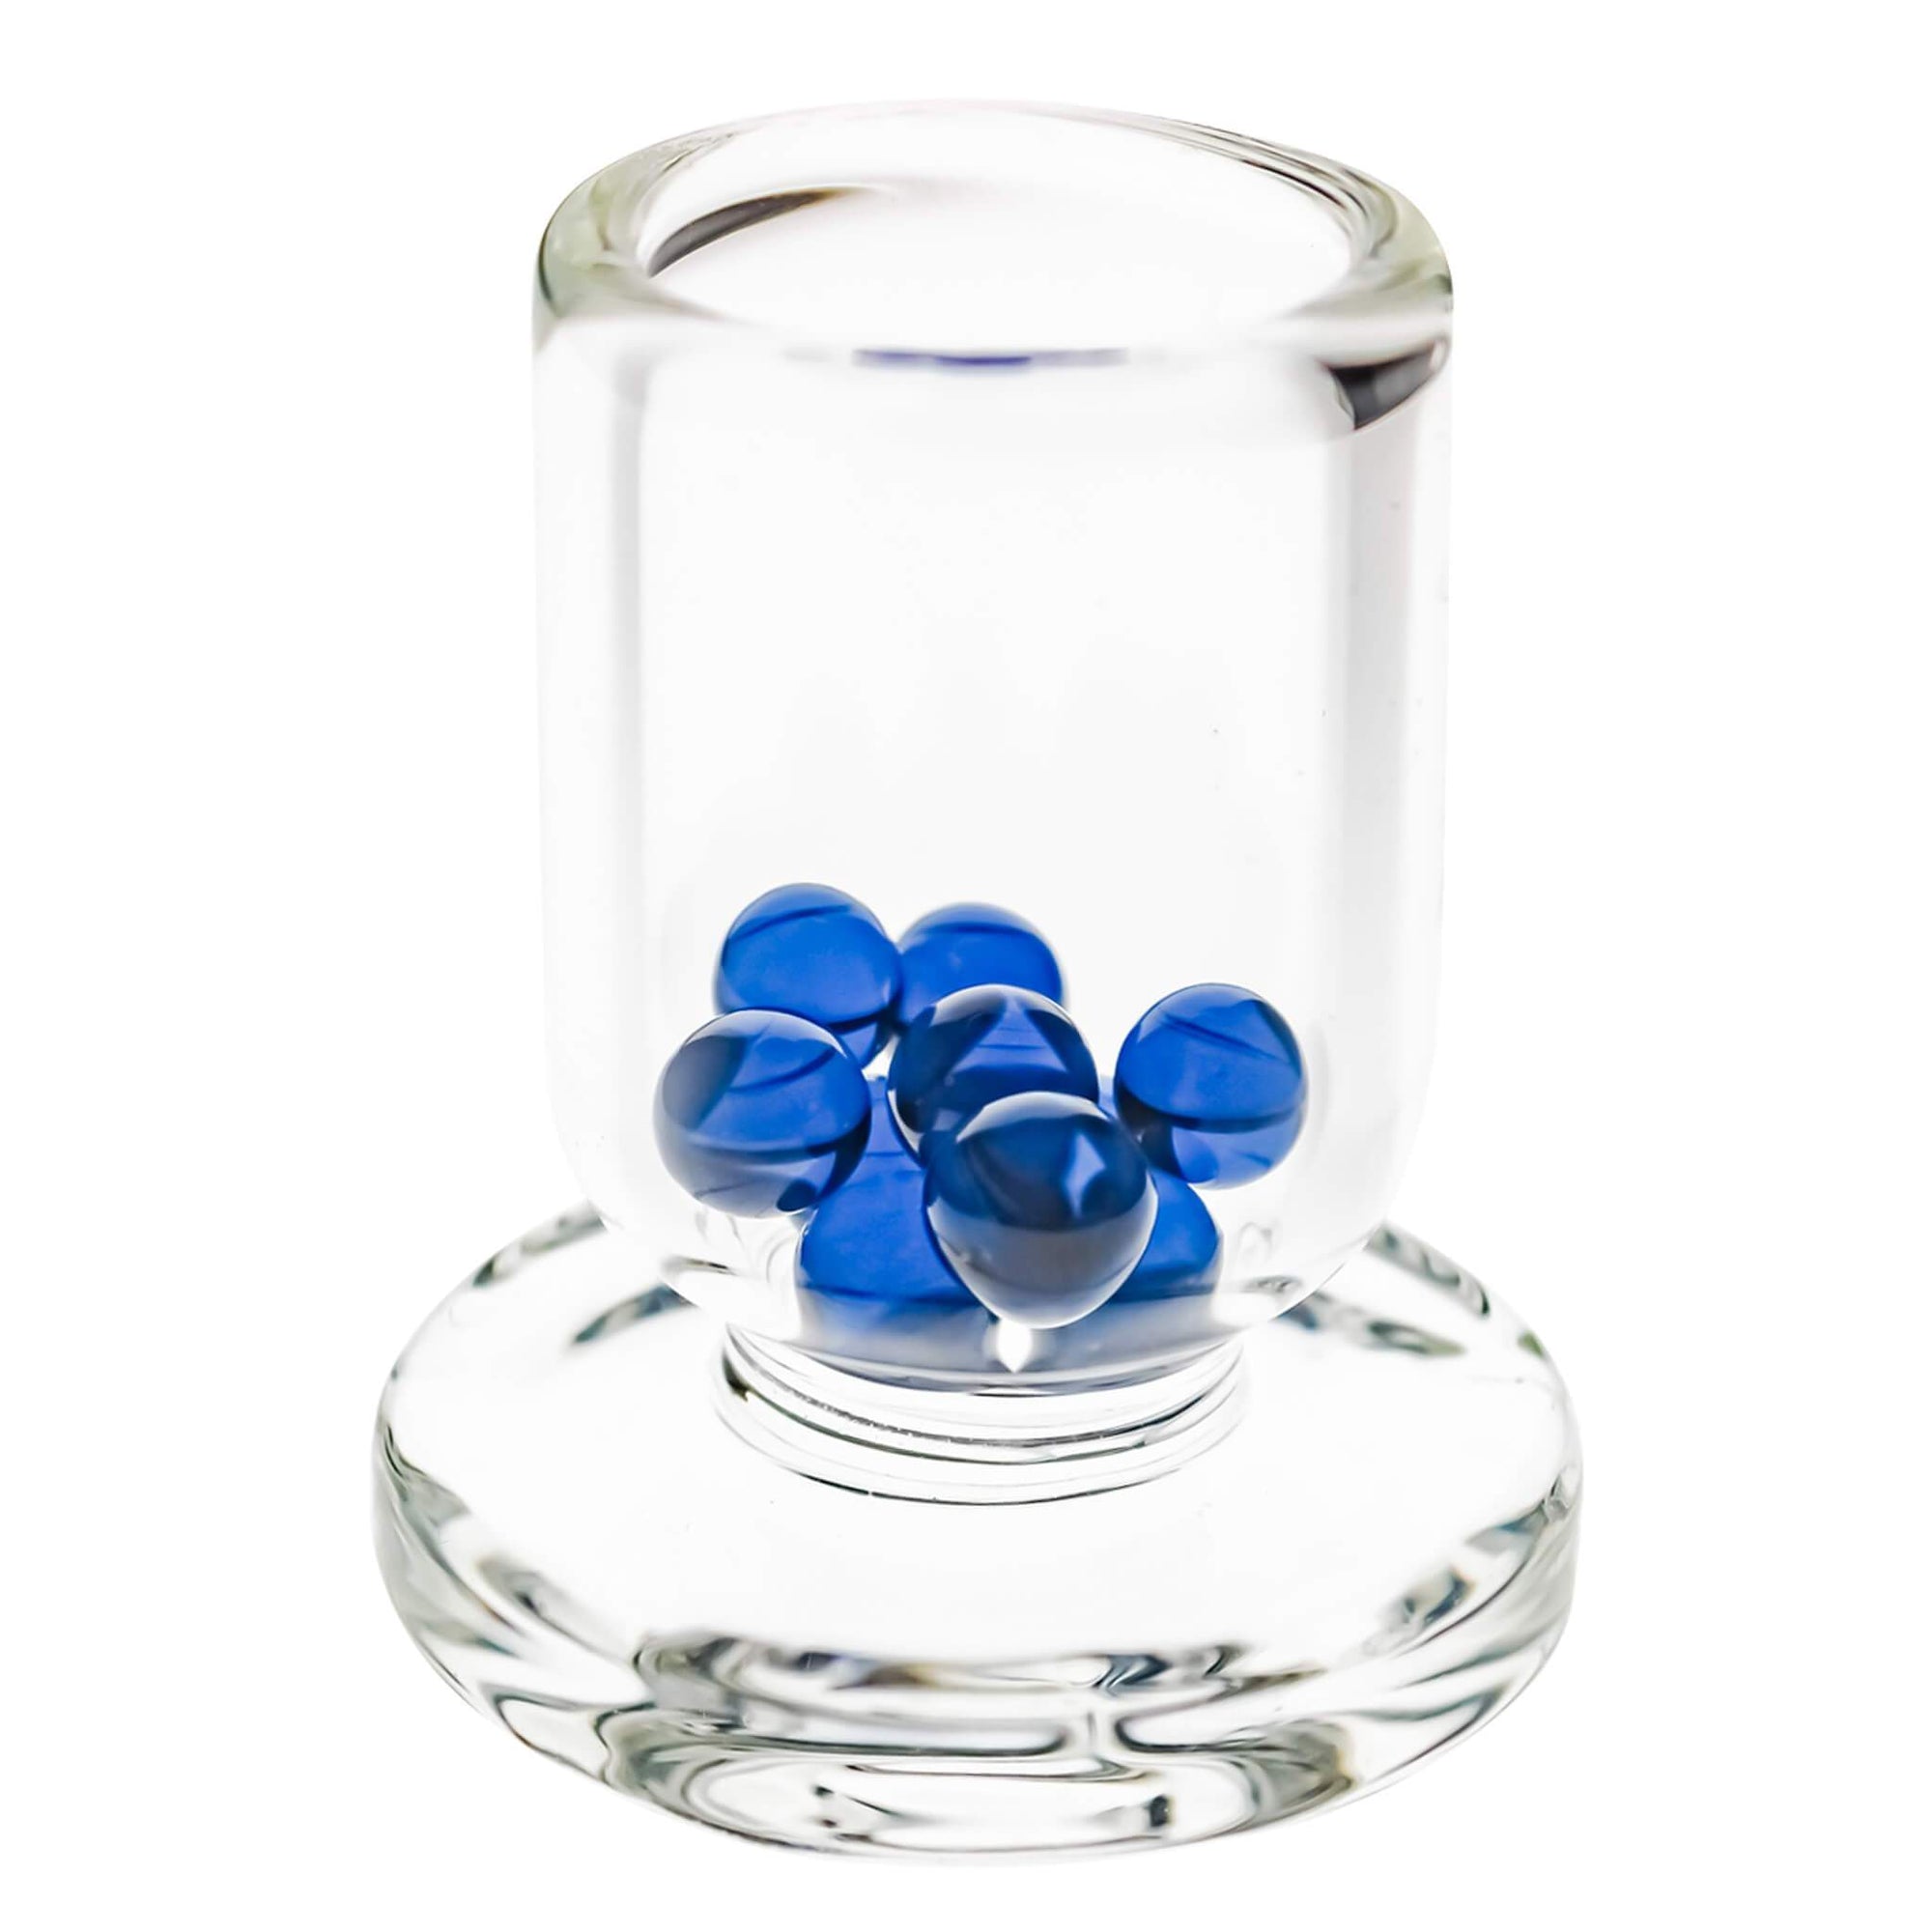 Blue Crystal 6mm Terp Pearls | In 25mm Banger | Dabbing Warehouse